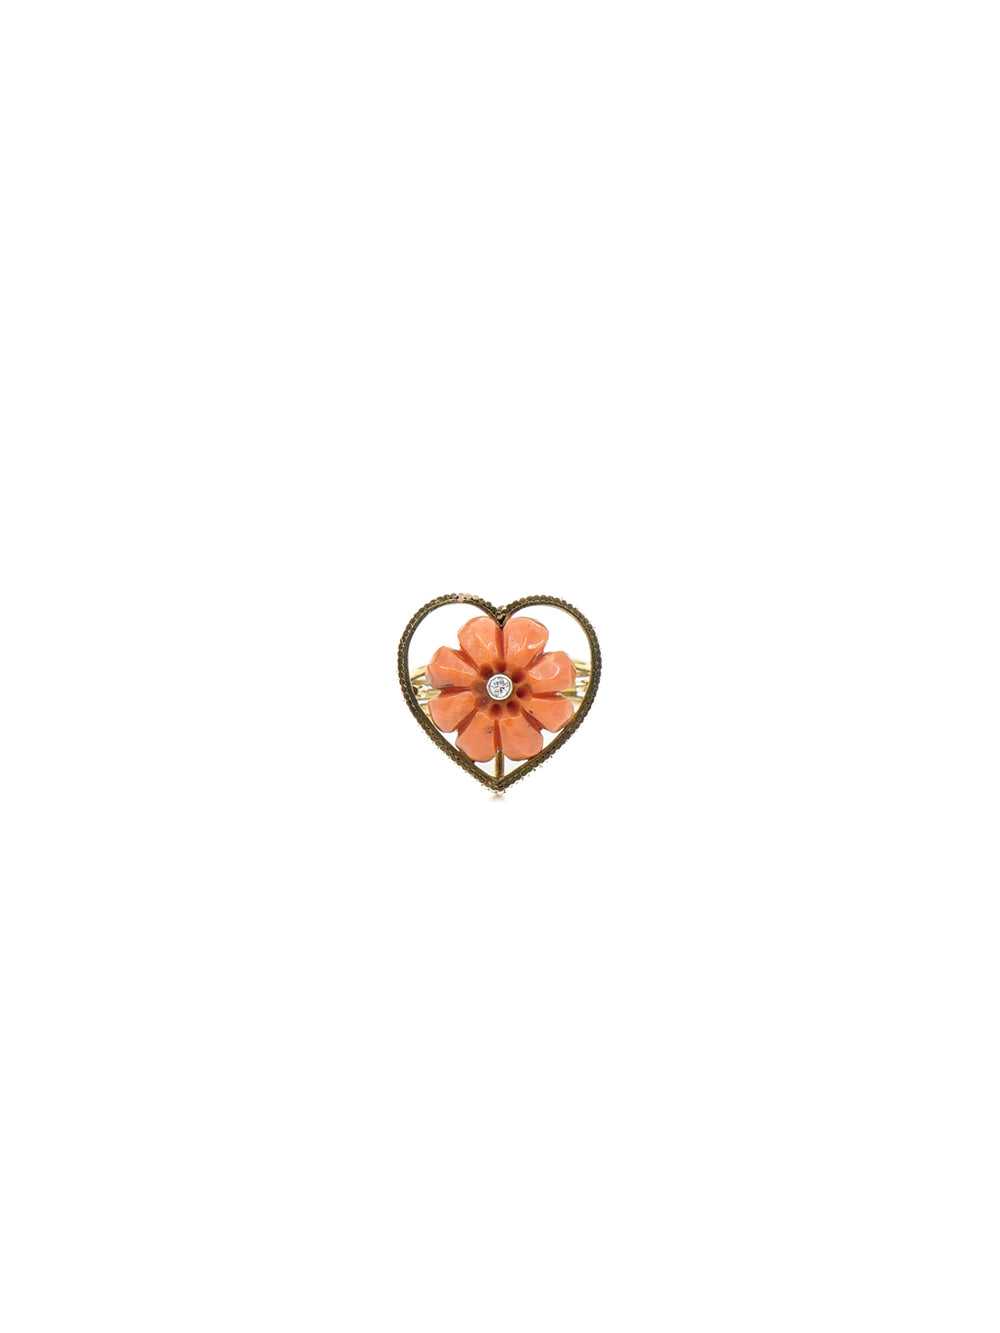 14K Heart Motif Coral and Diamond Ring - image 2